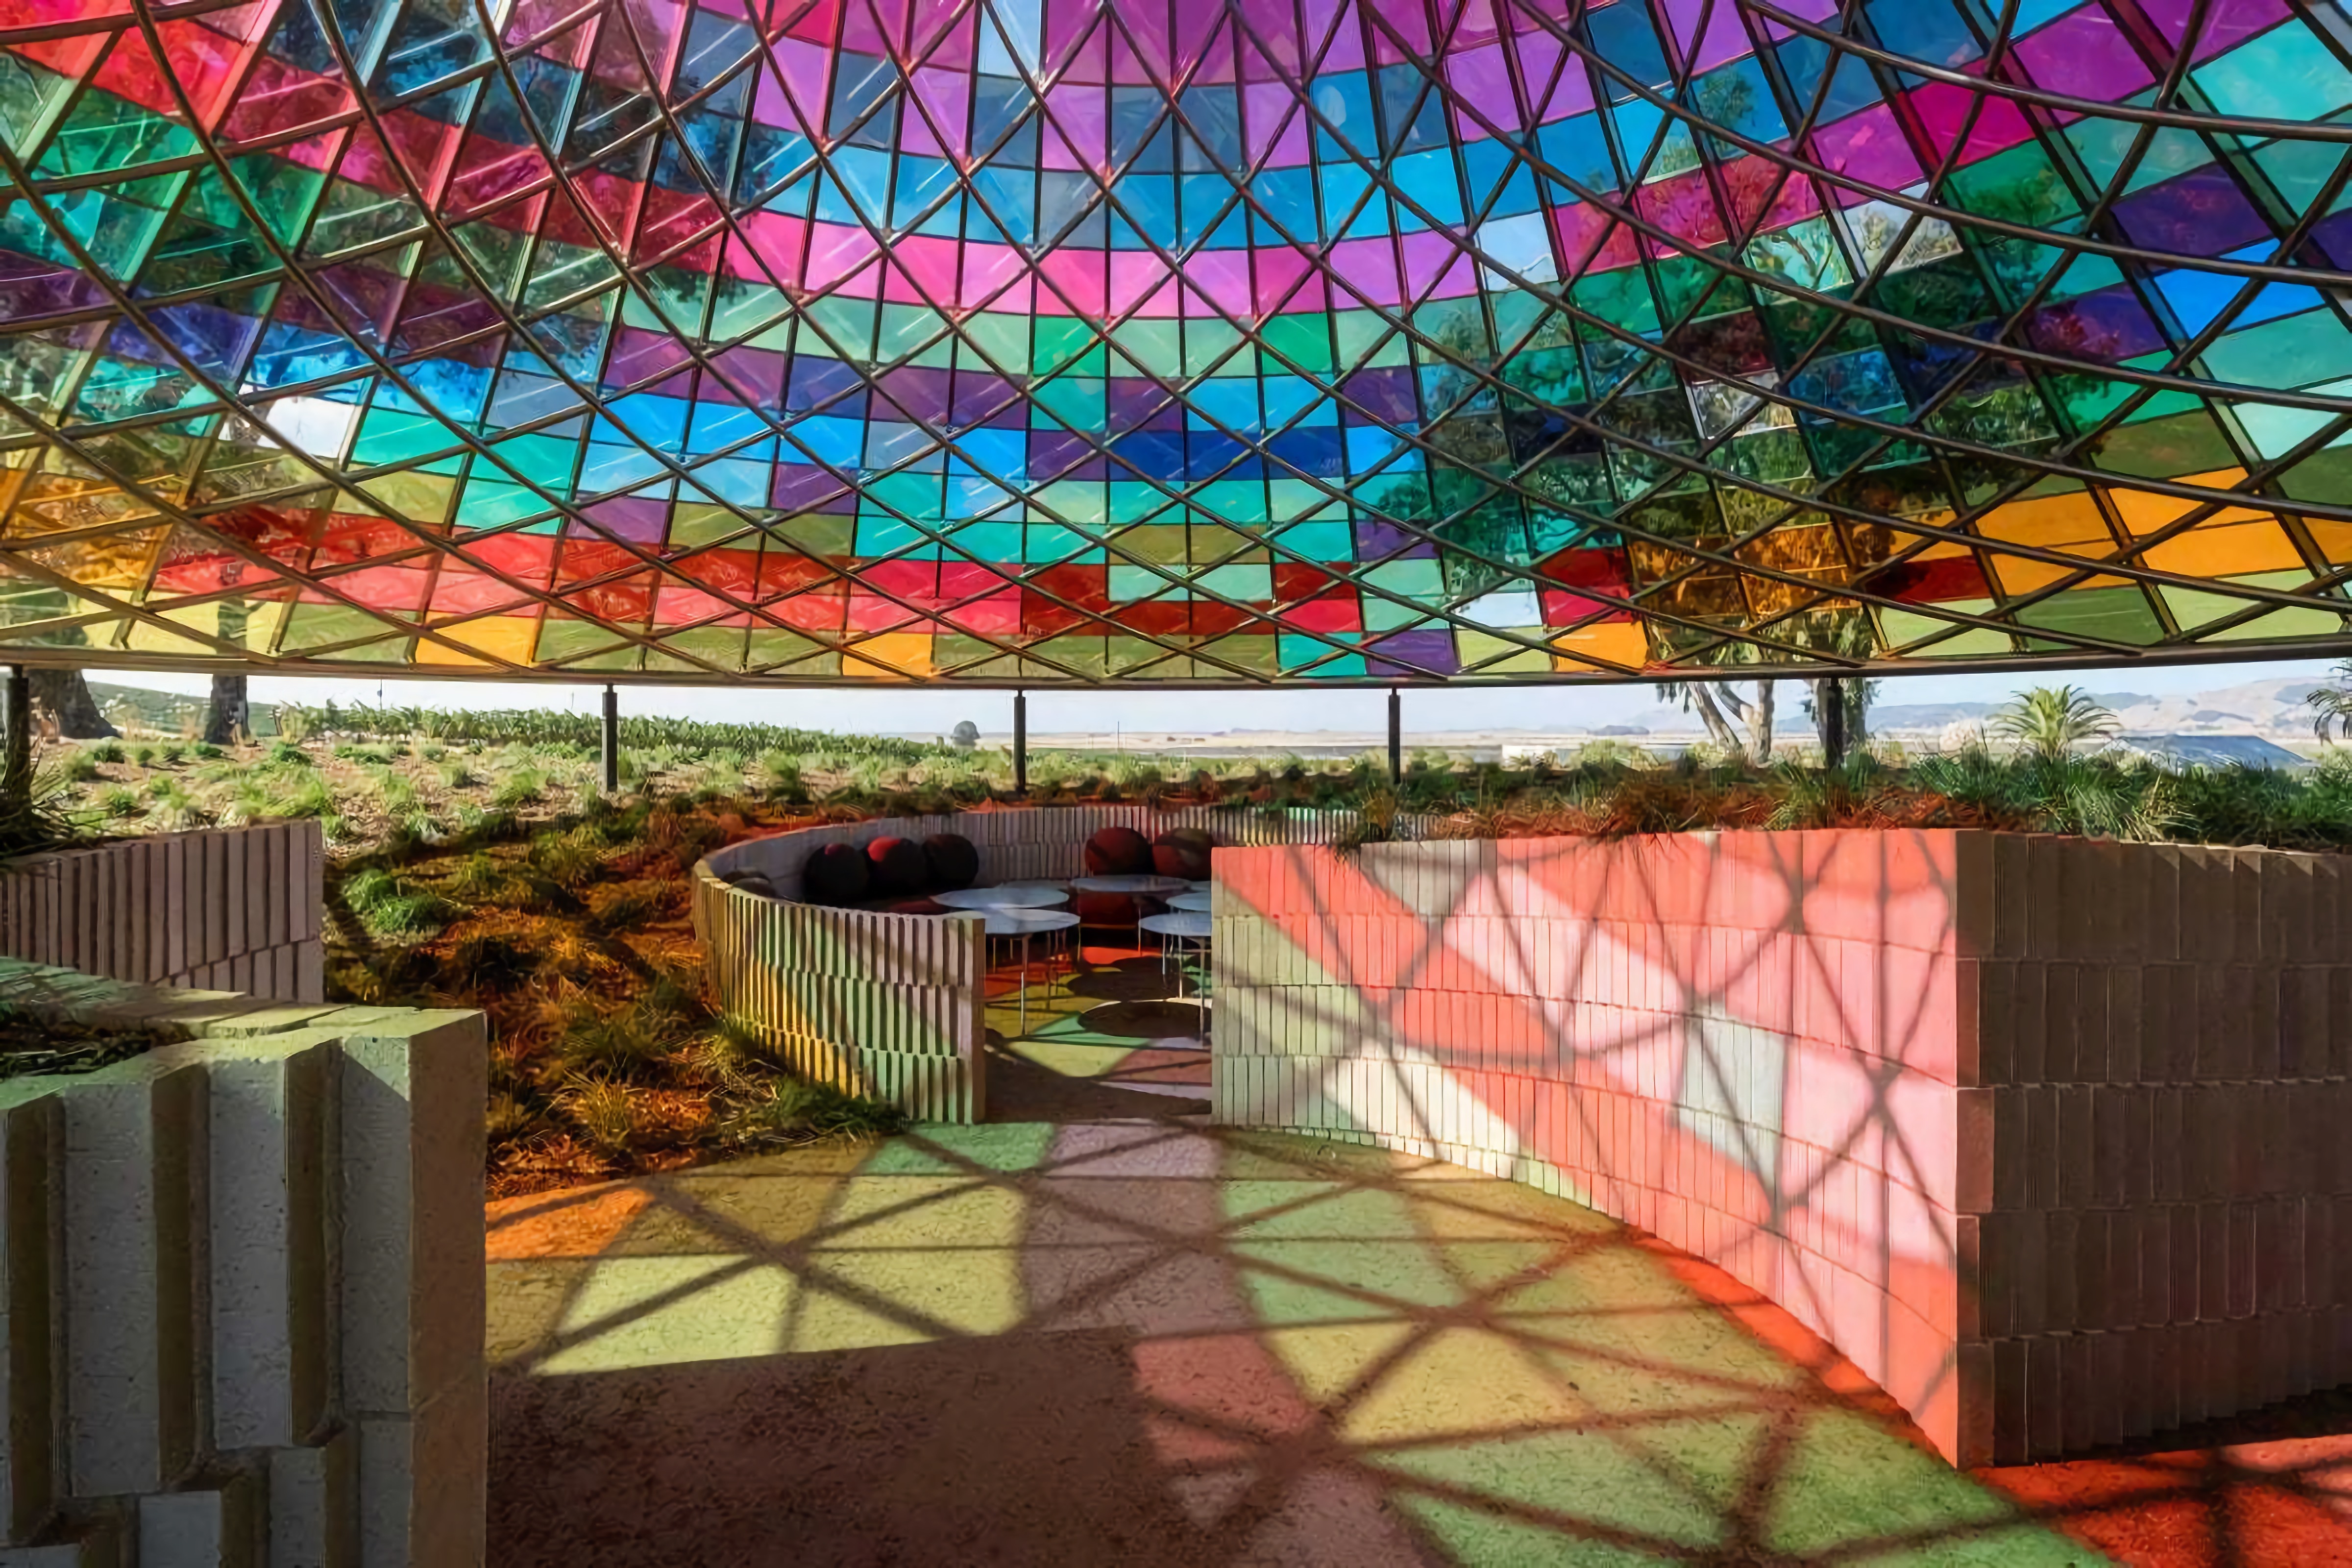 Vertical Panorama Pavilion: Playing with Multicolored Glass Reflections